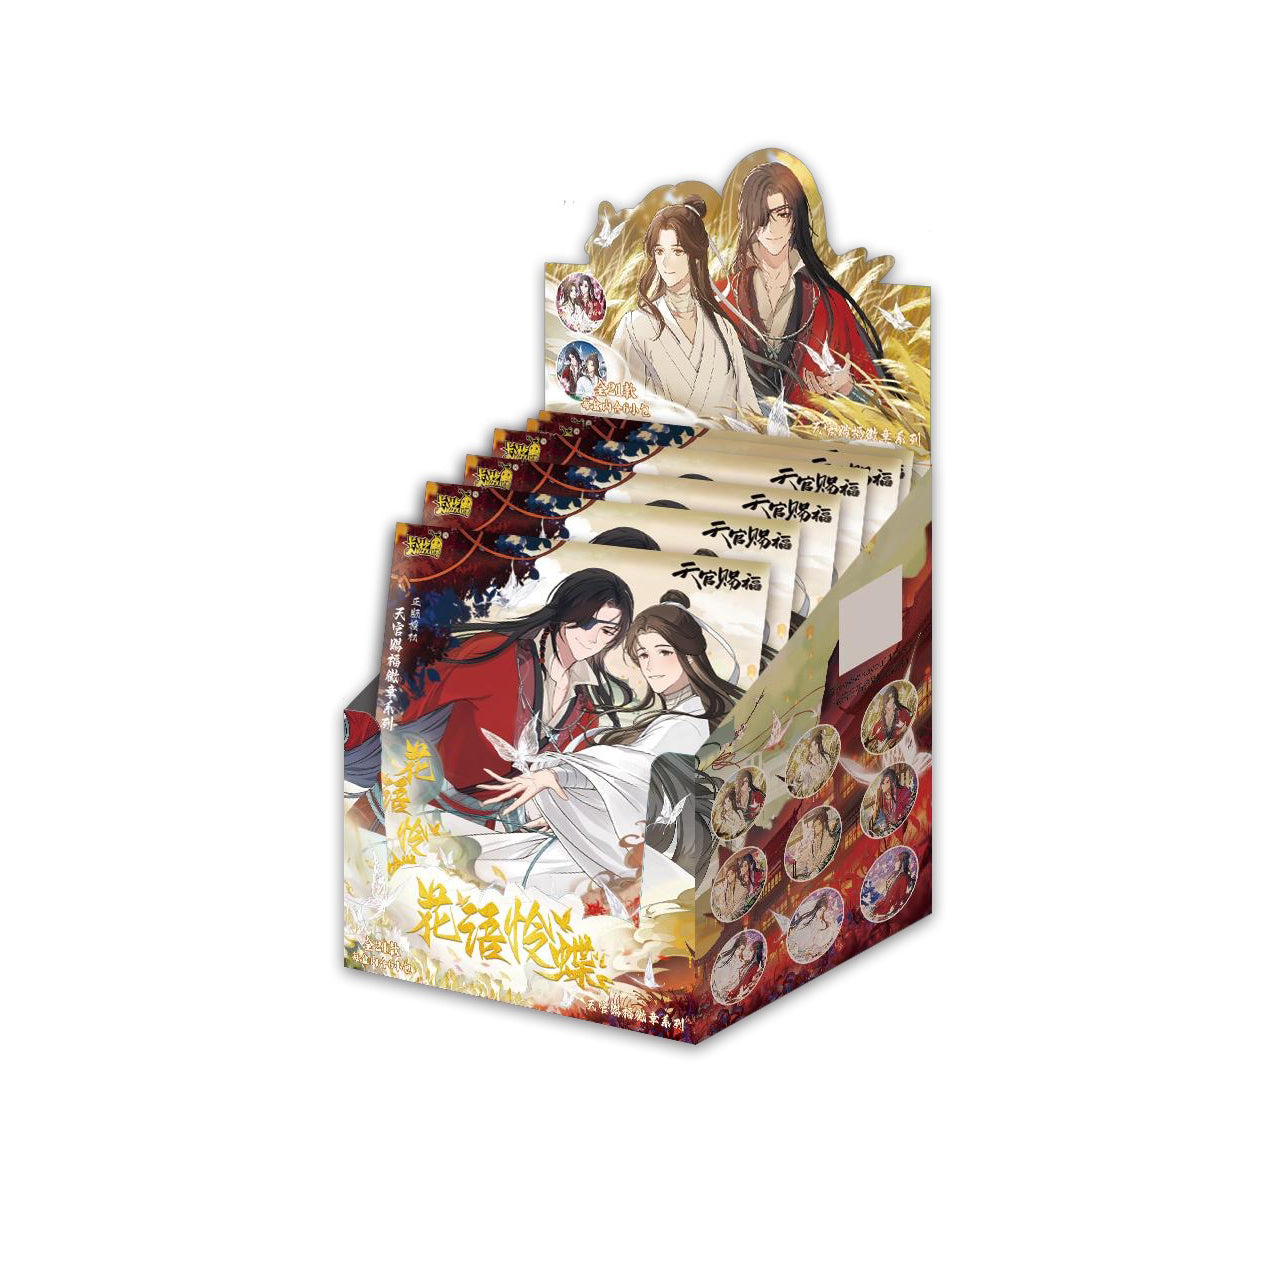 Pre-order Heaven Official's Blessing Badge Hua Cheng Badge Blind Box